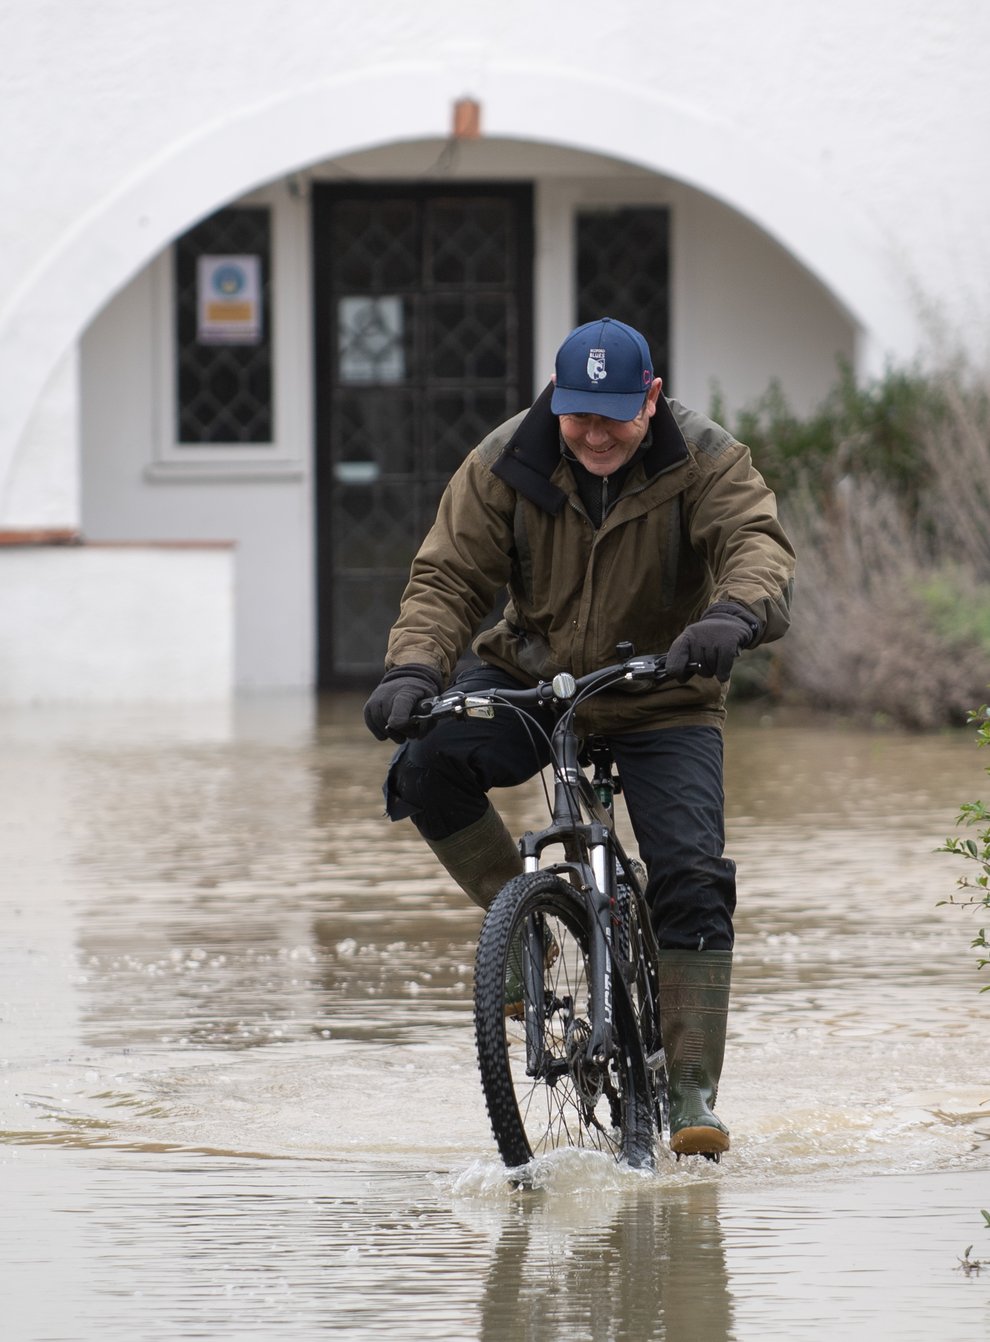 A man cycles through flood water at The Barn Hotel in Bedford, after residents living near the River Great Ouse in north Bedfordshire were “strongly urged” to seek alternative accommodation due to fears of flooding (Joe Giddens/PA)